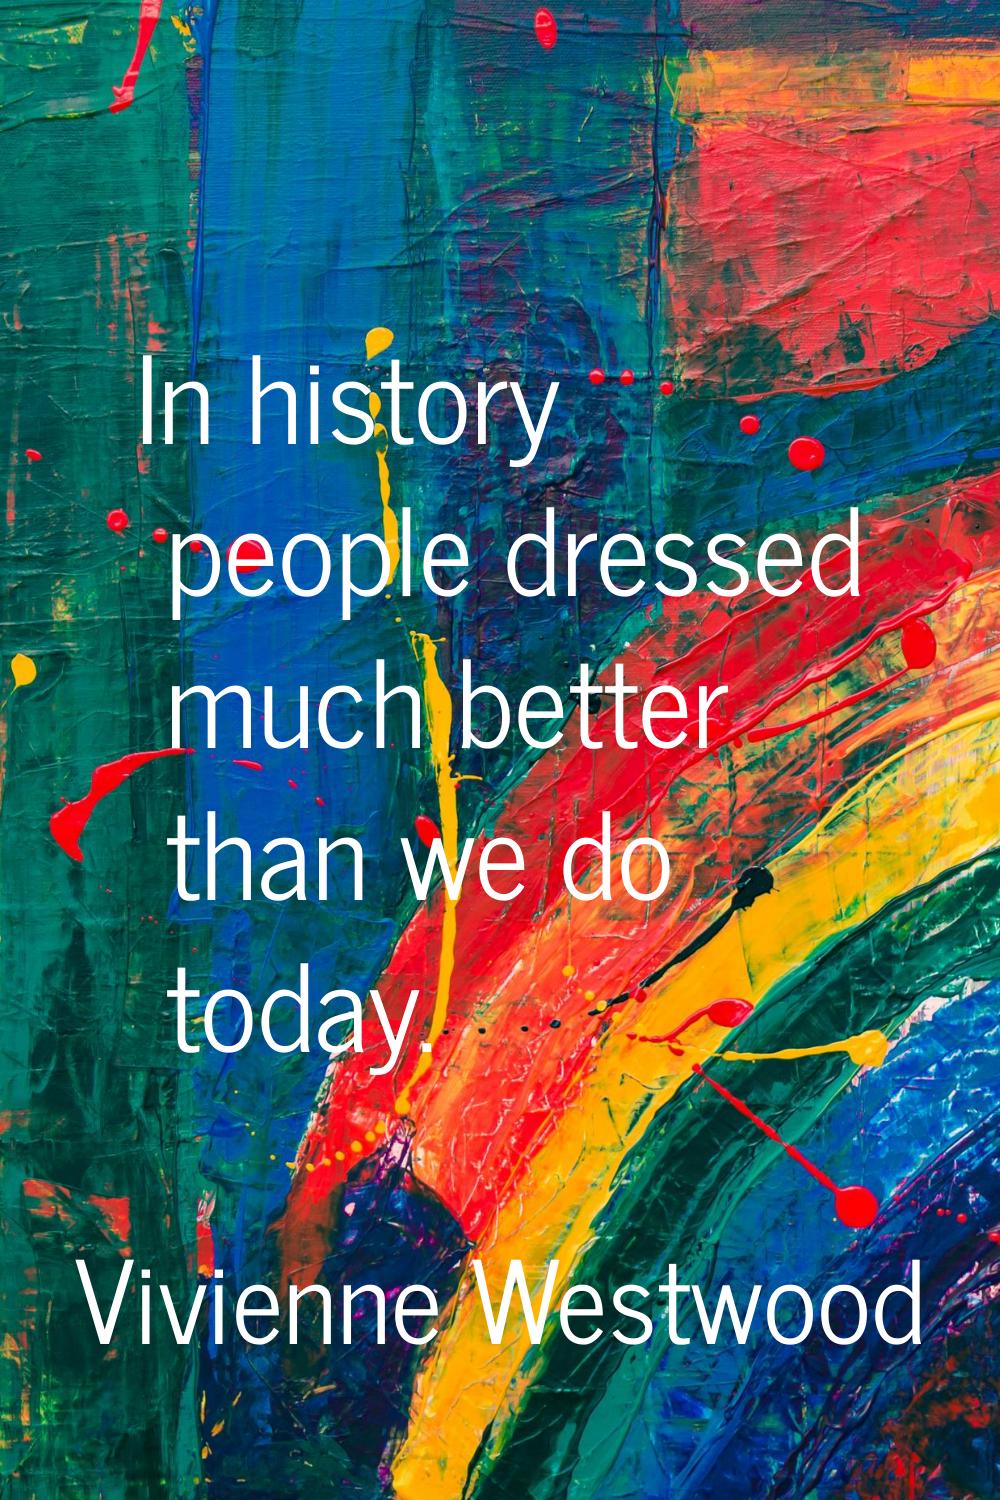 In history people dressed much better than we do today.